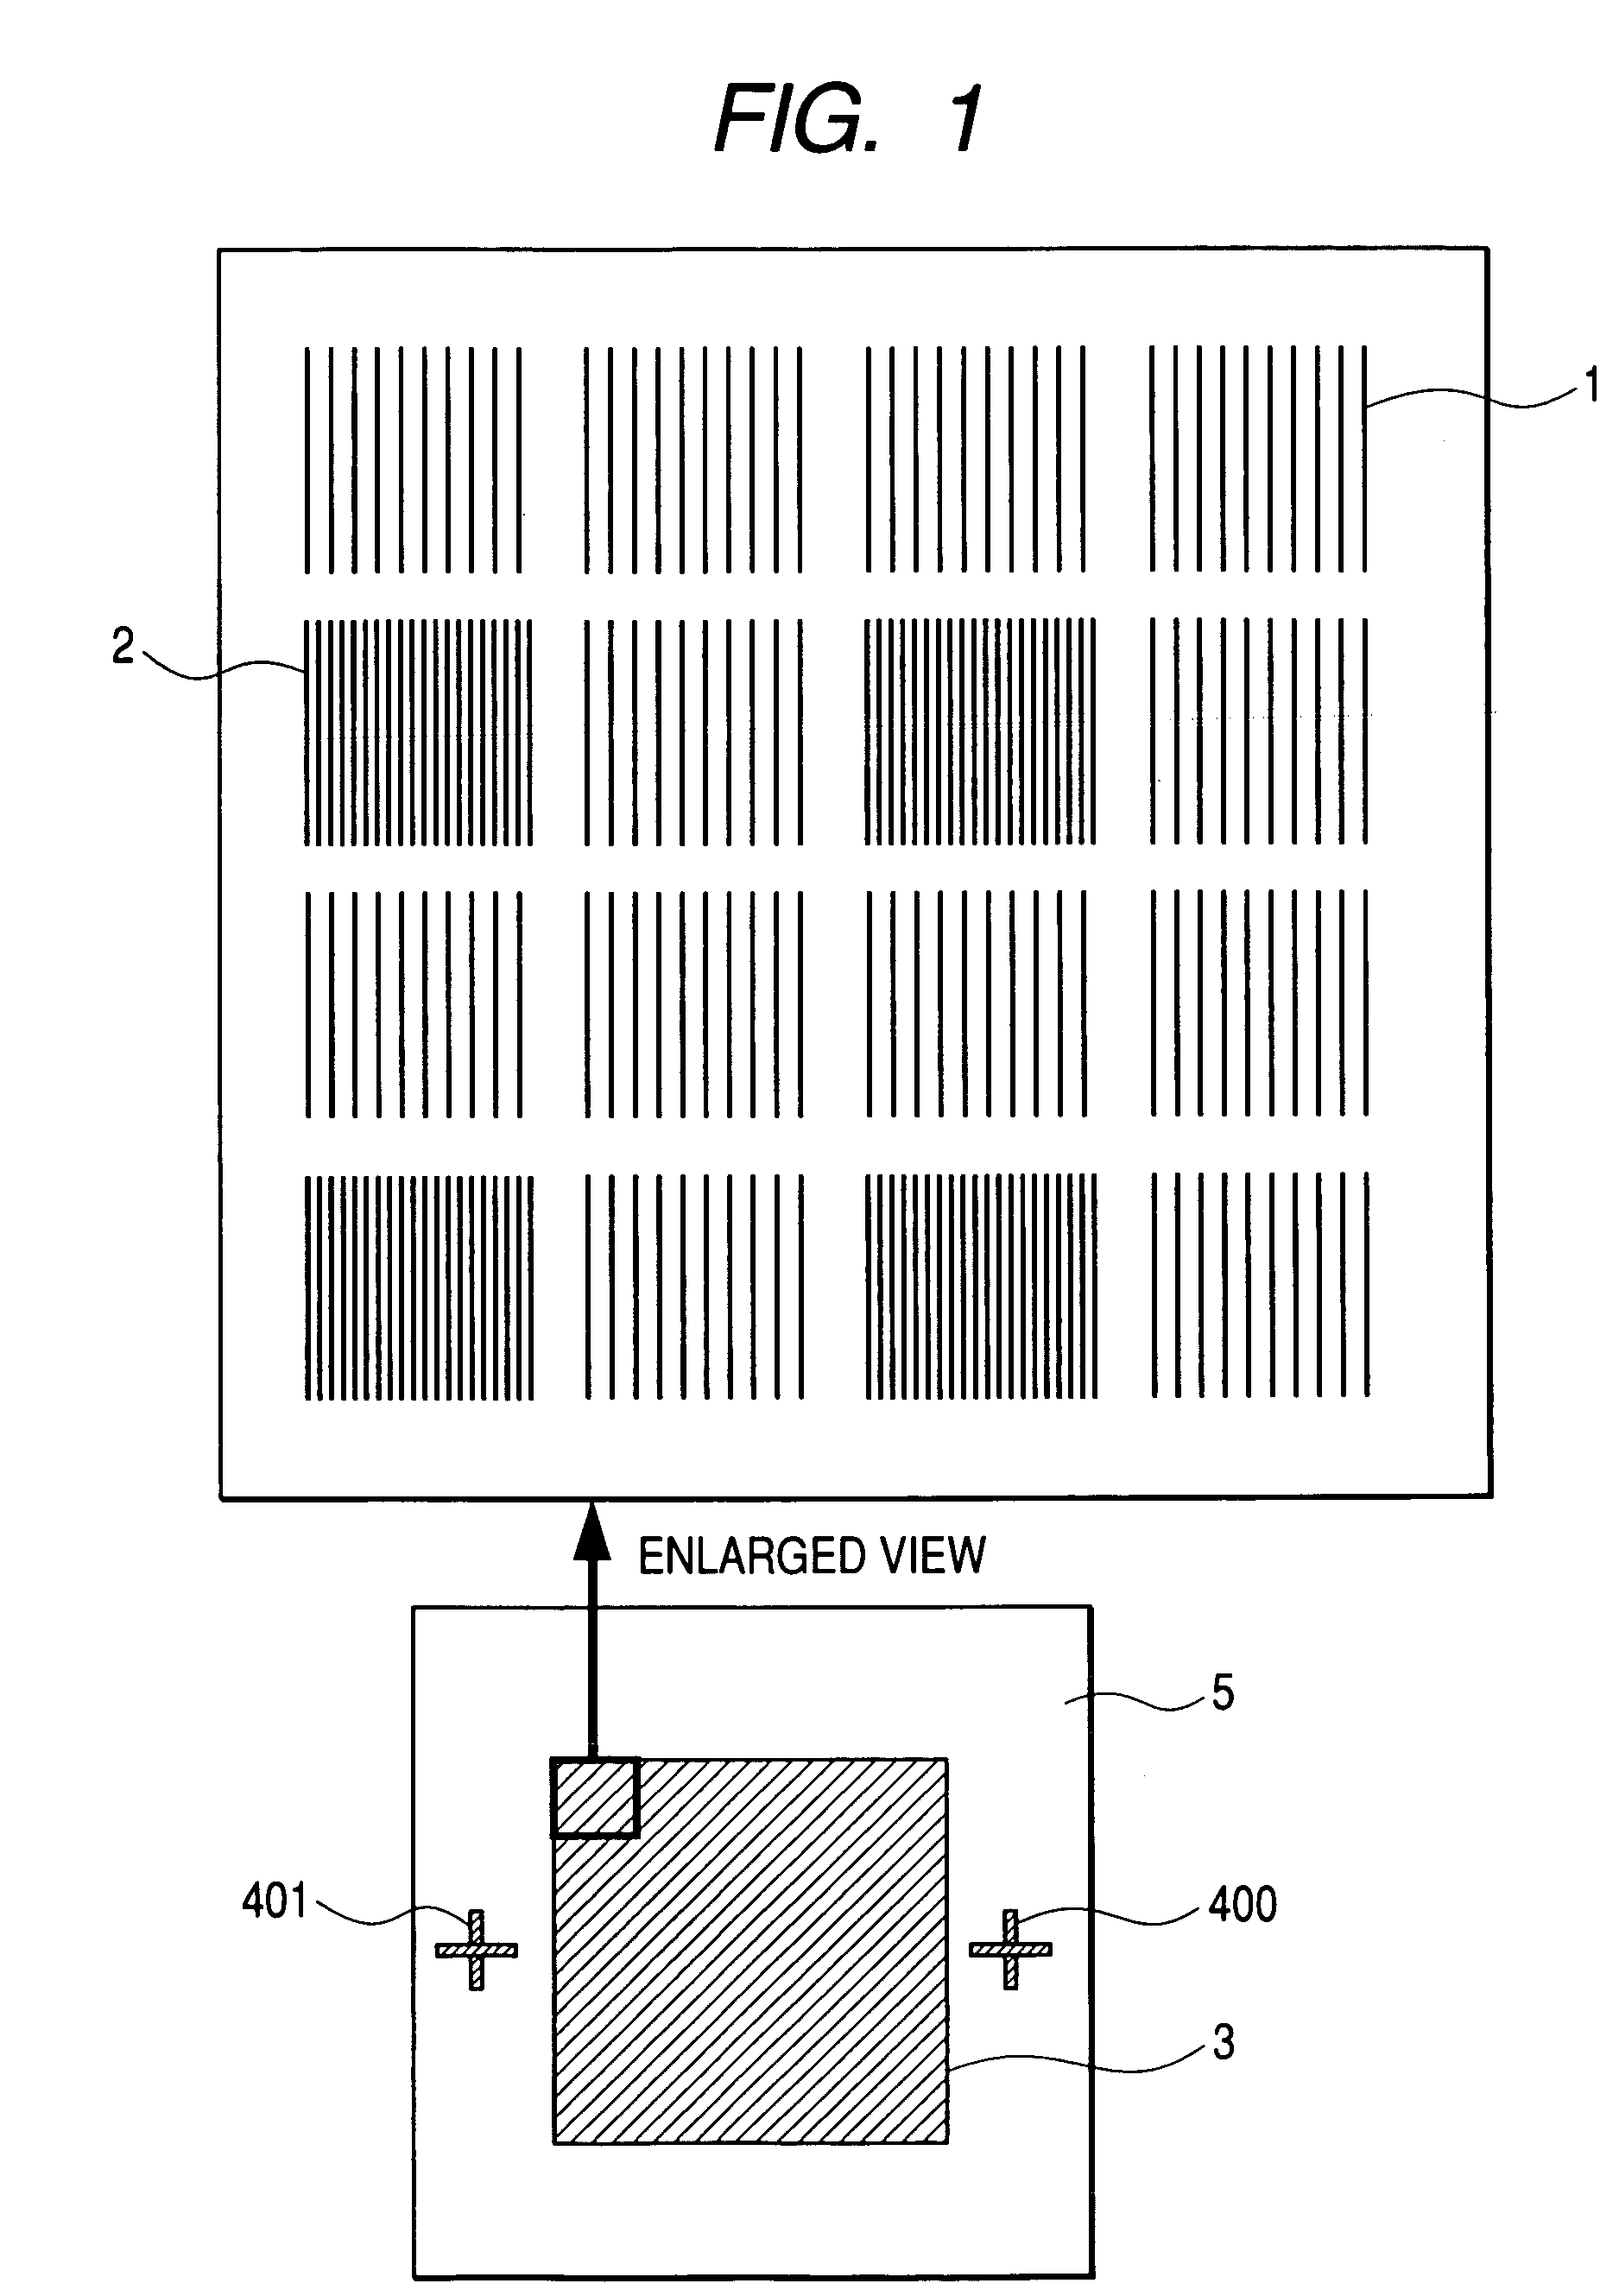 Standard reference for metrology and calibration method of electron-beam metrology system using the same